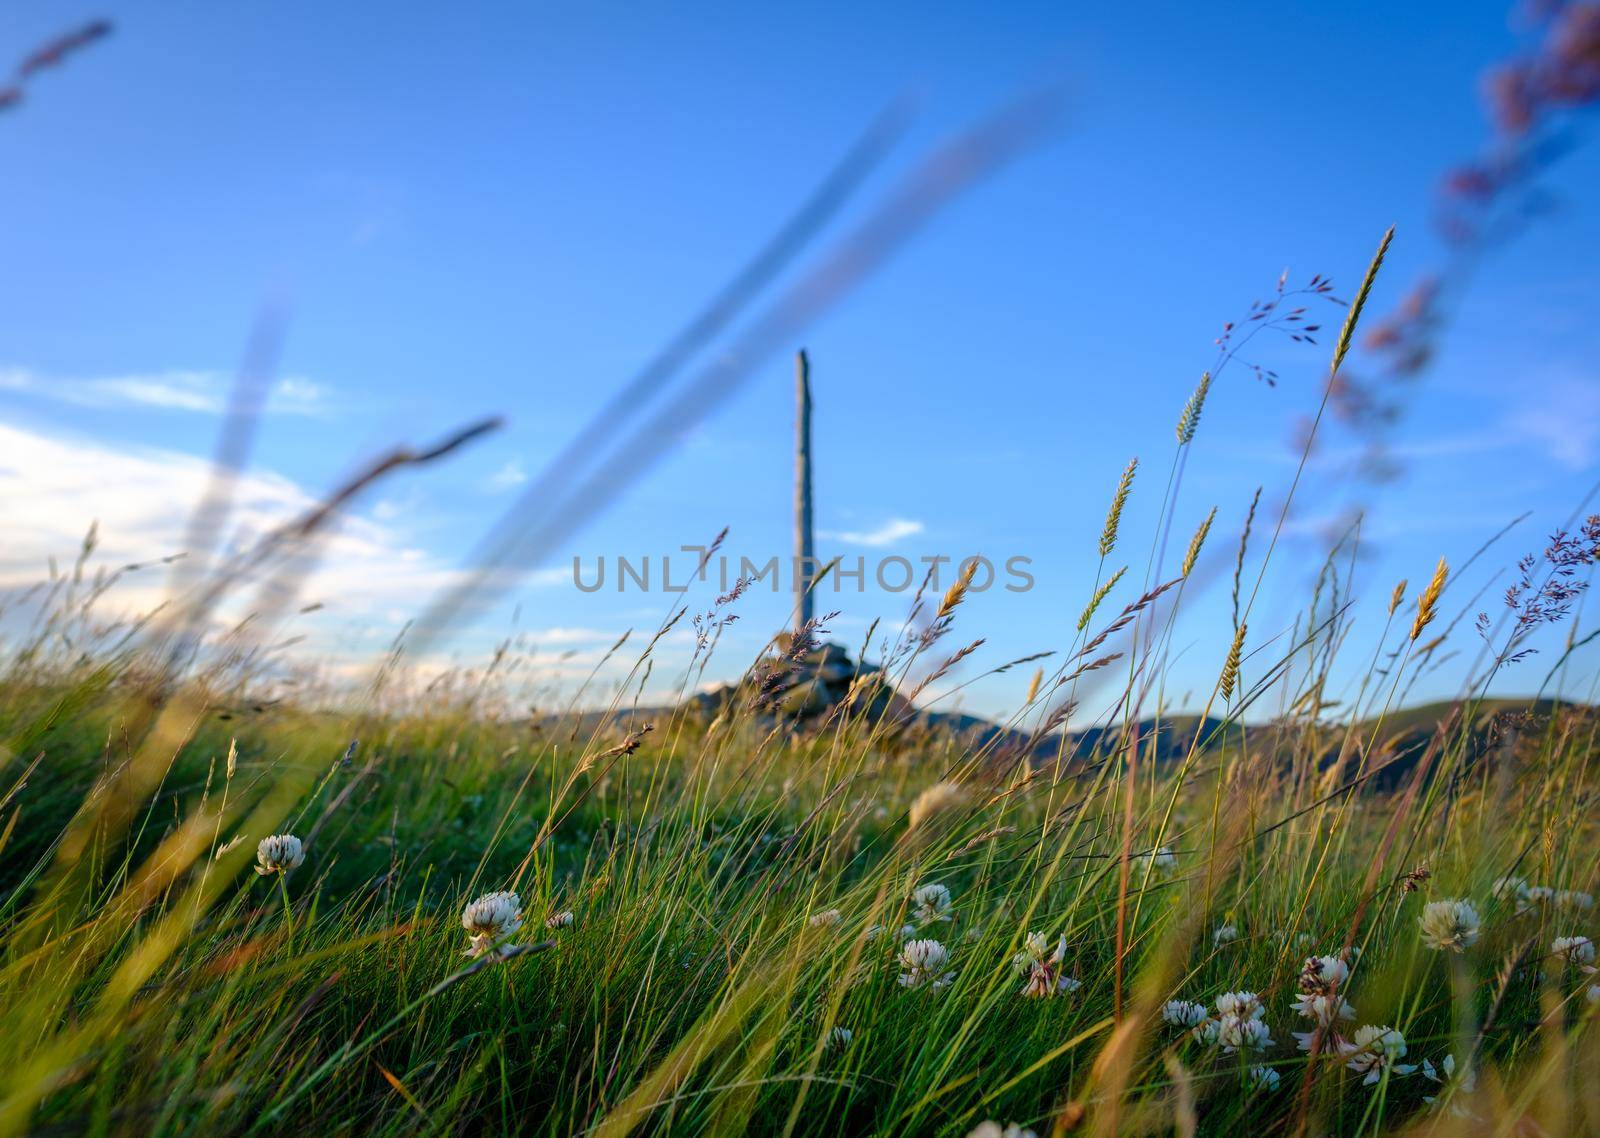 Rural Image Of A Hilltop Cairn In Scotland With The Focus On Grasses In The Foreground